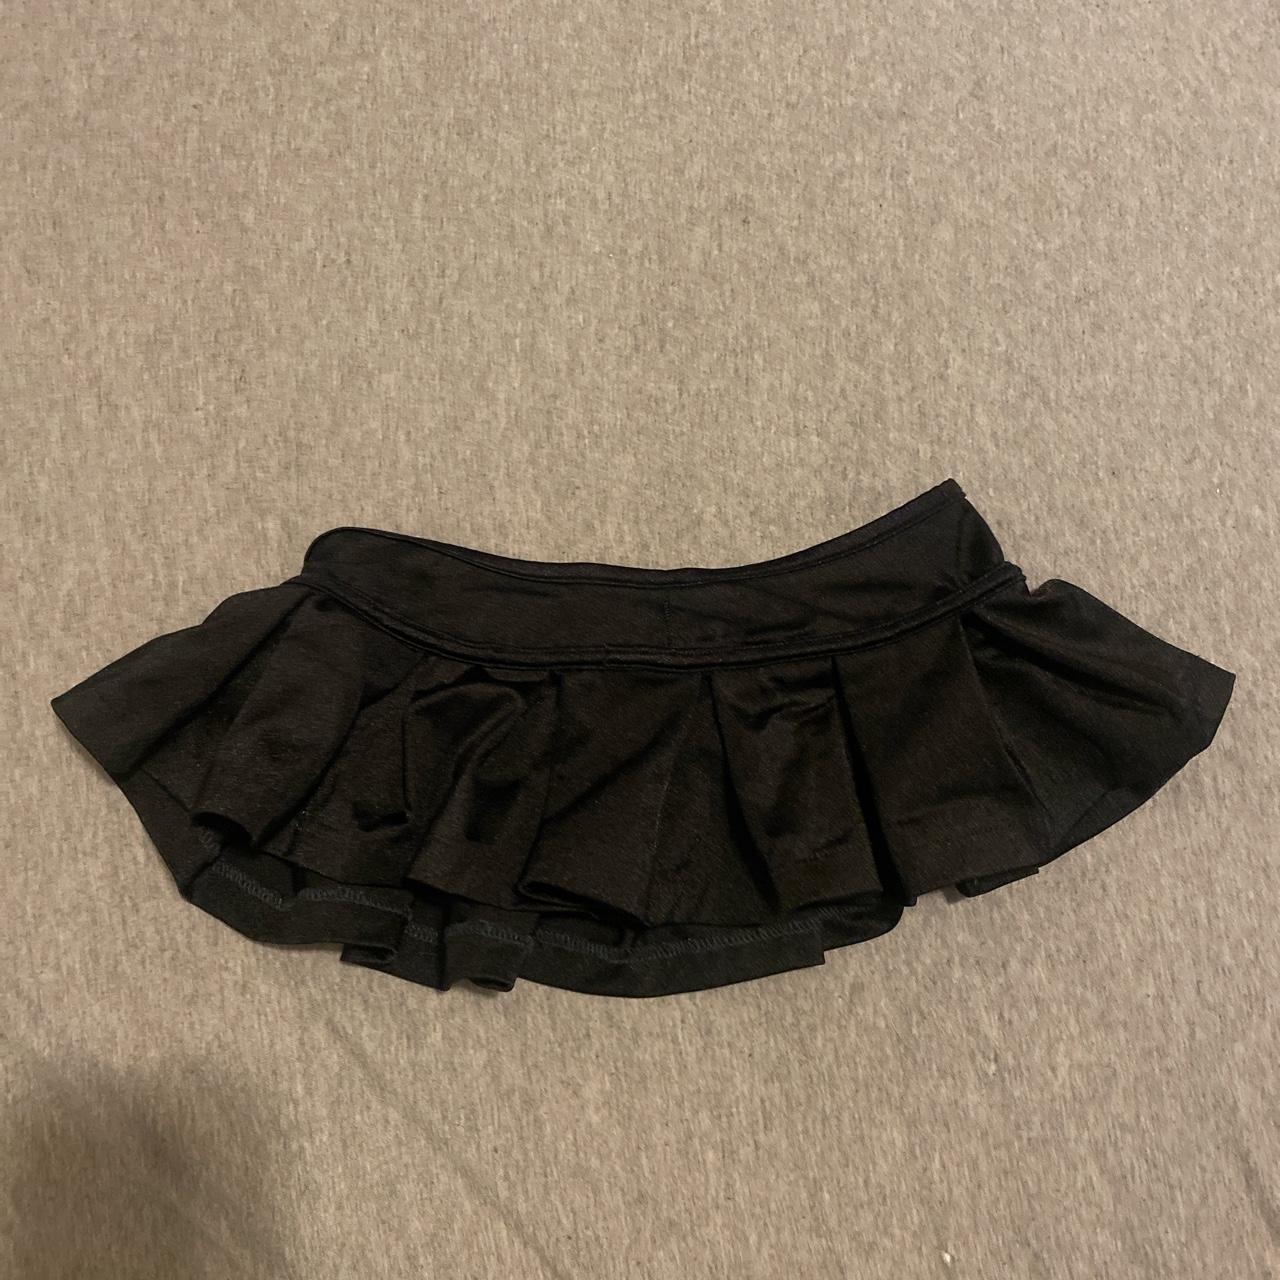 angel candy micro mini skirt stretchy size... - Depop